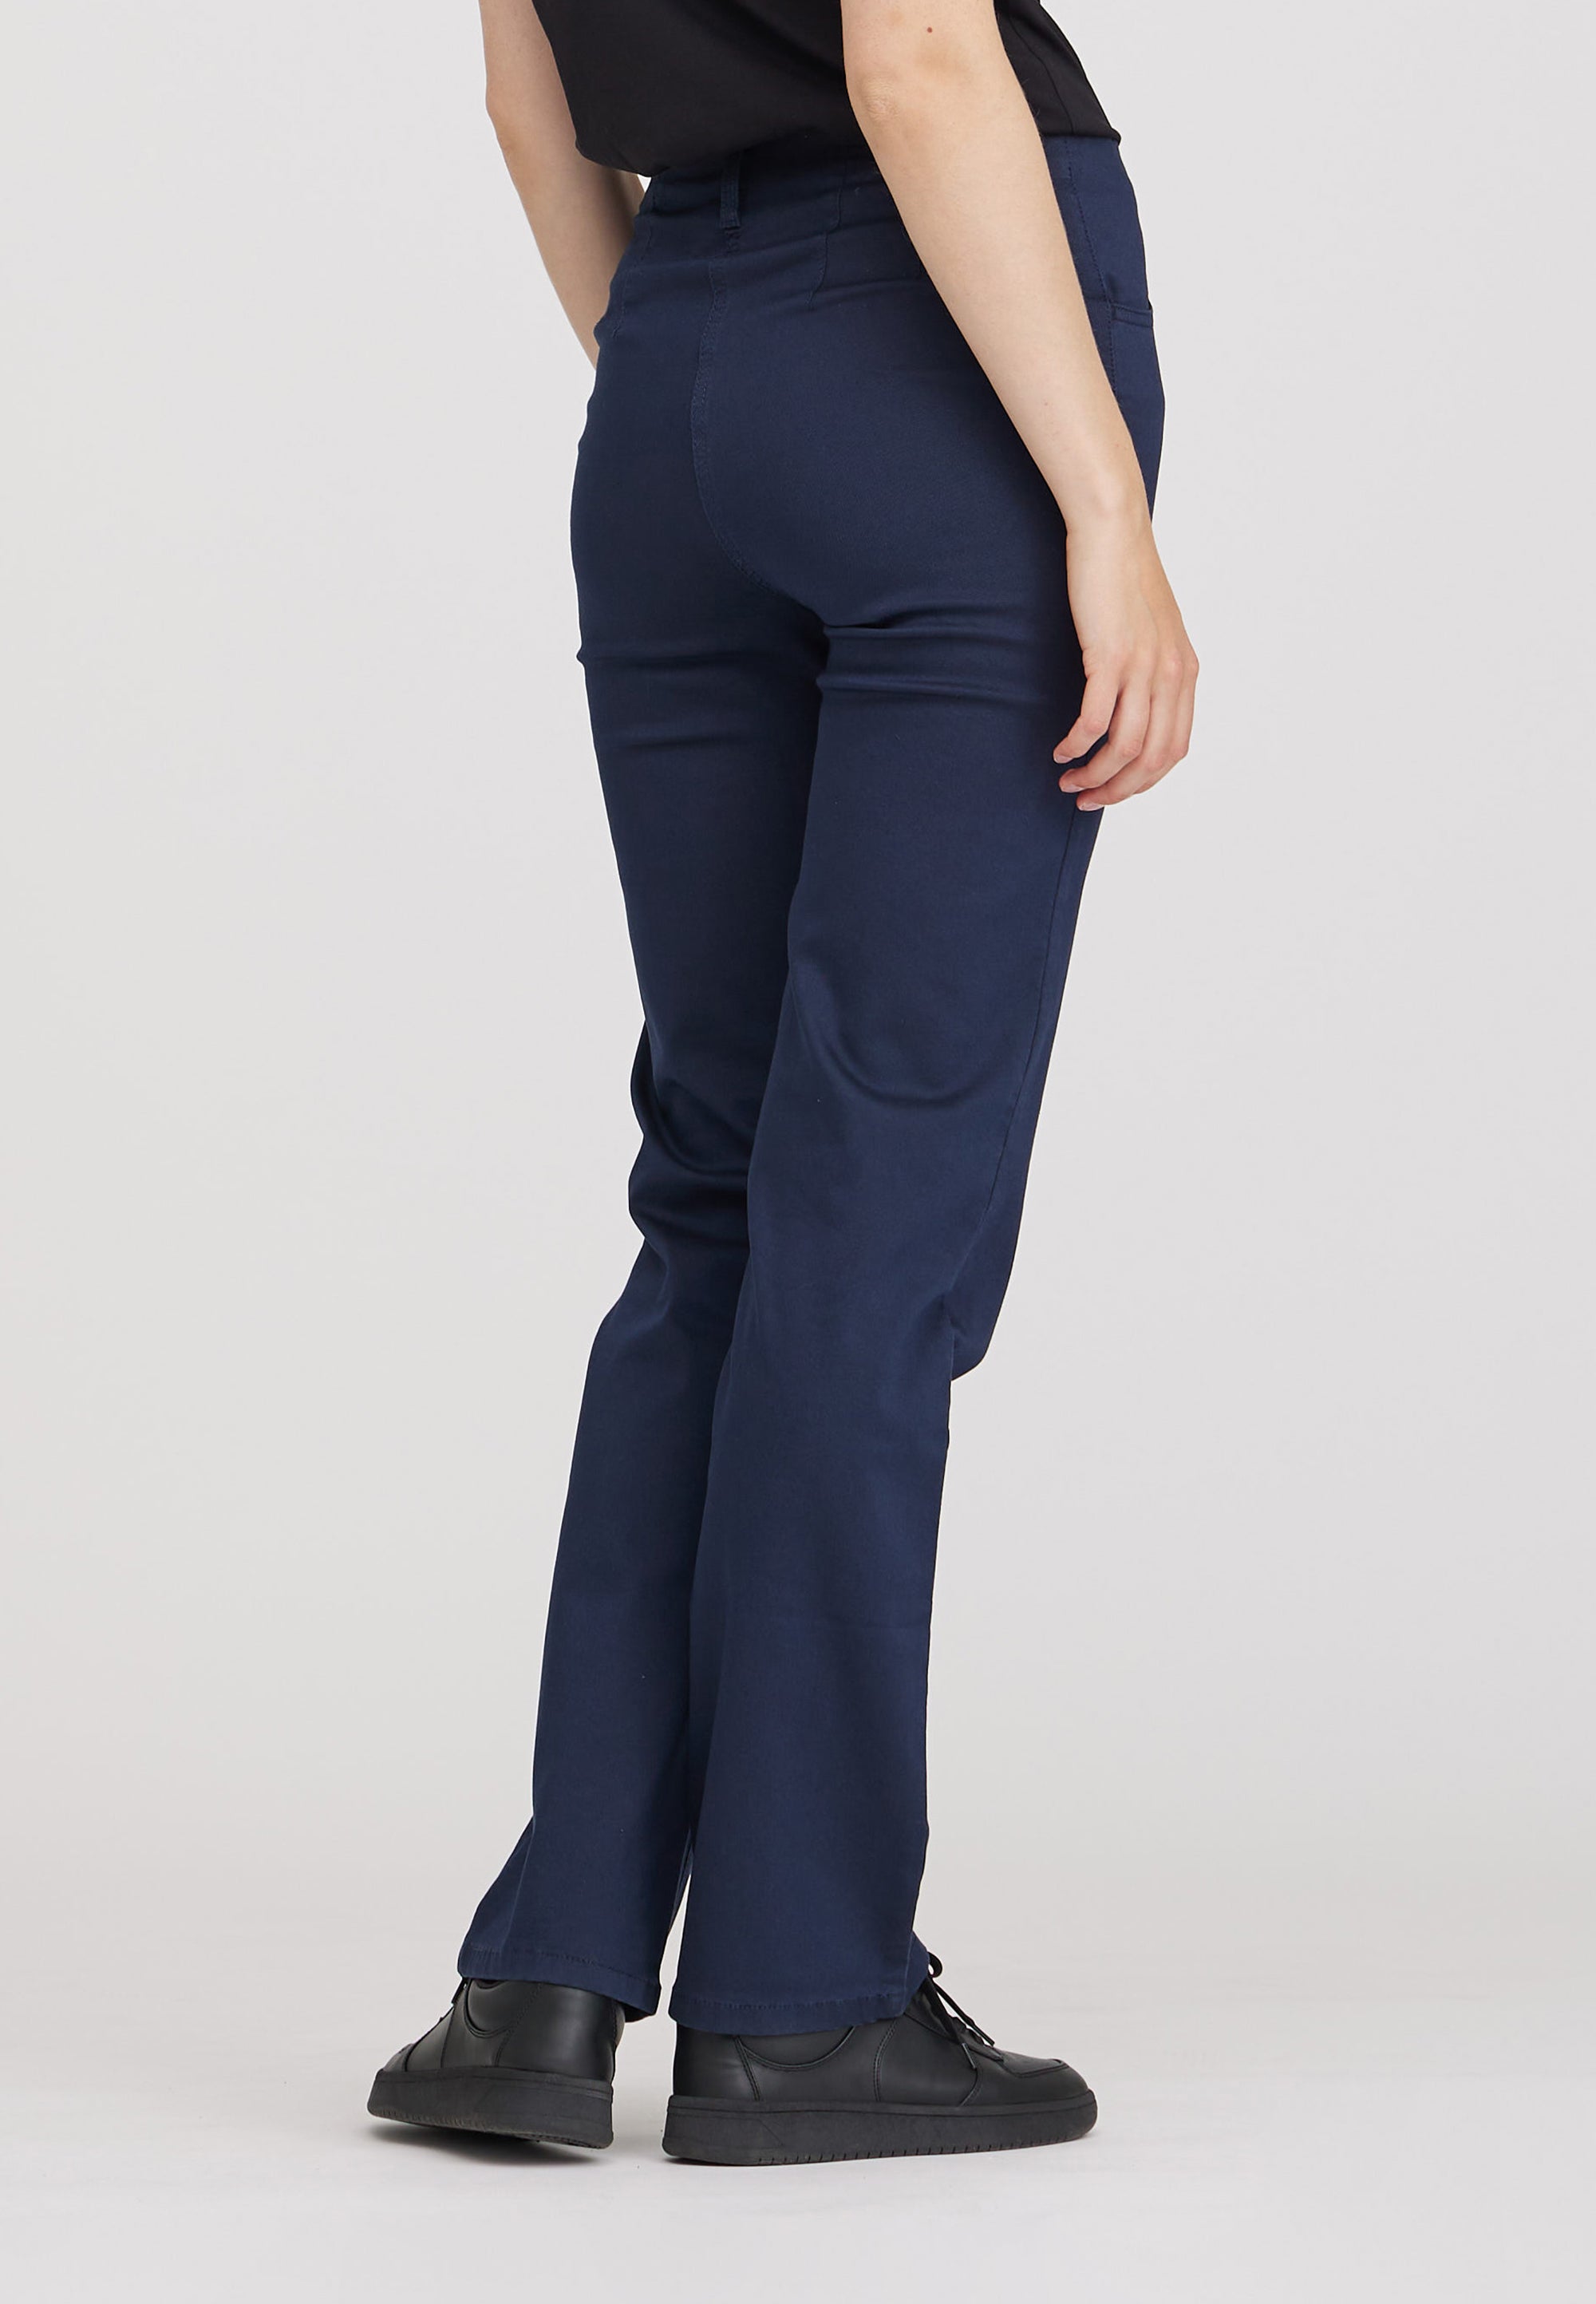 LAURIE  Tracy Straight - Medium Length Trousers STRAIGHT 49000 Navy